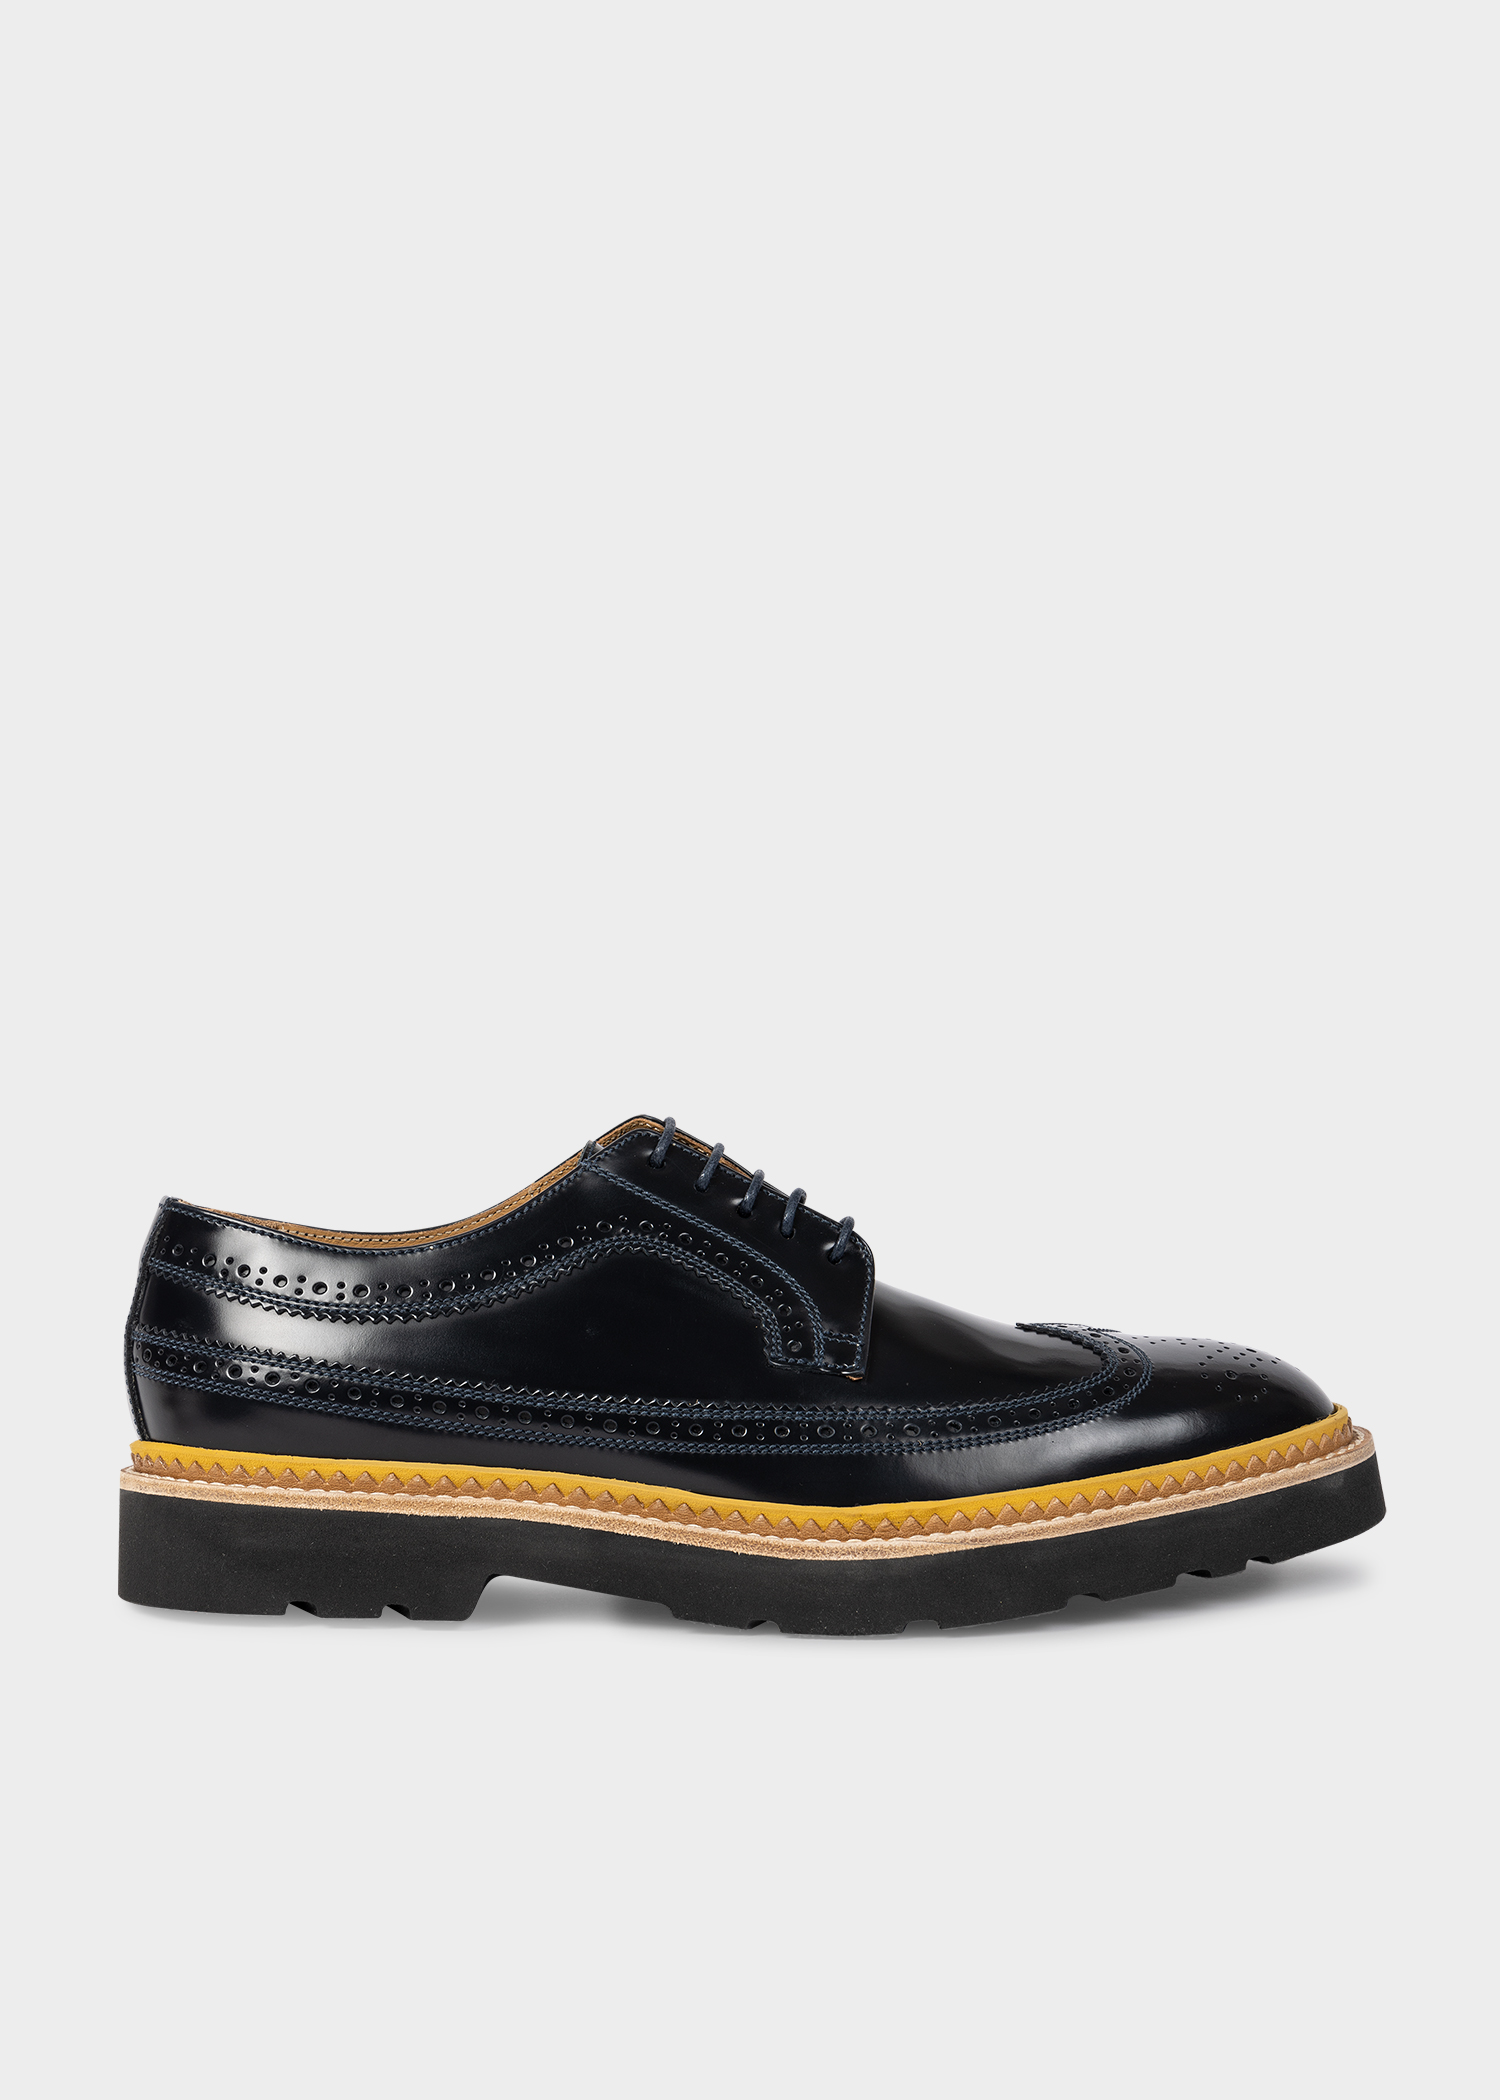 Men's Navy High-Shine Leather 'Count' Brogues